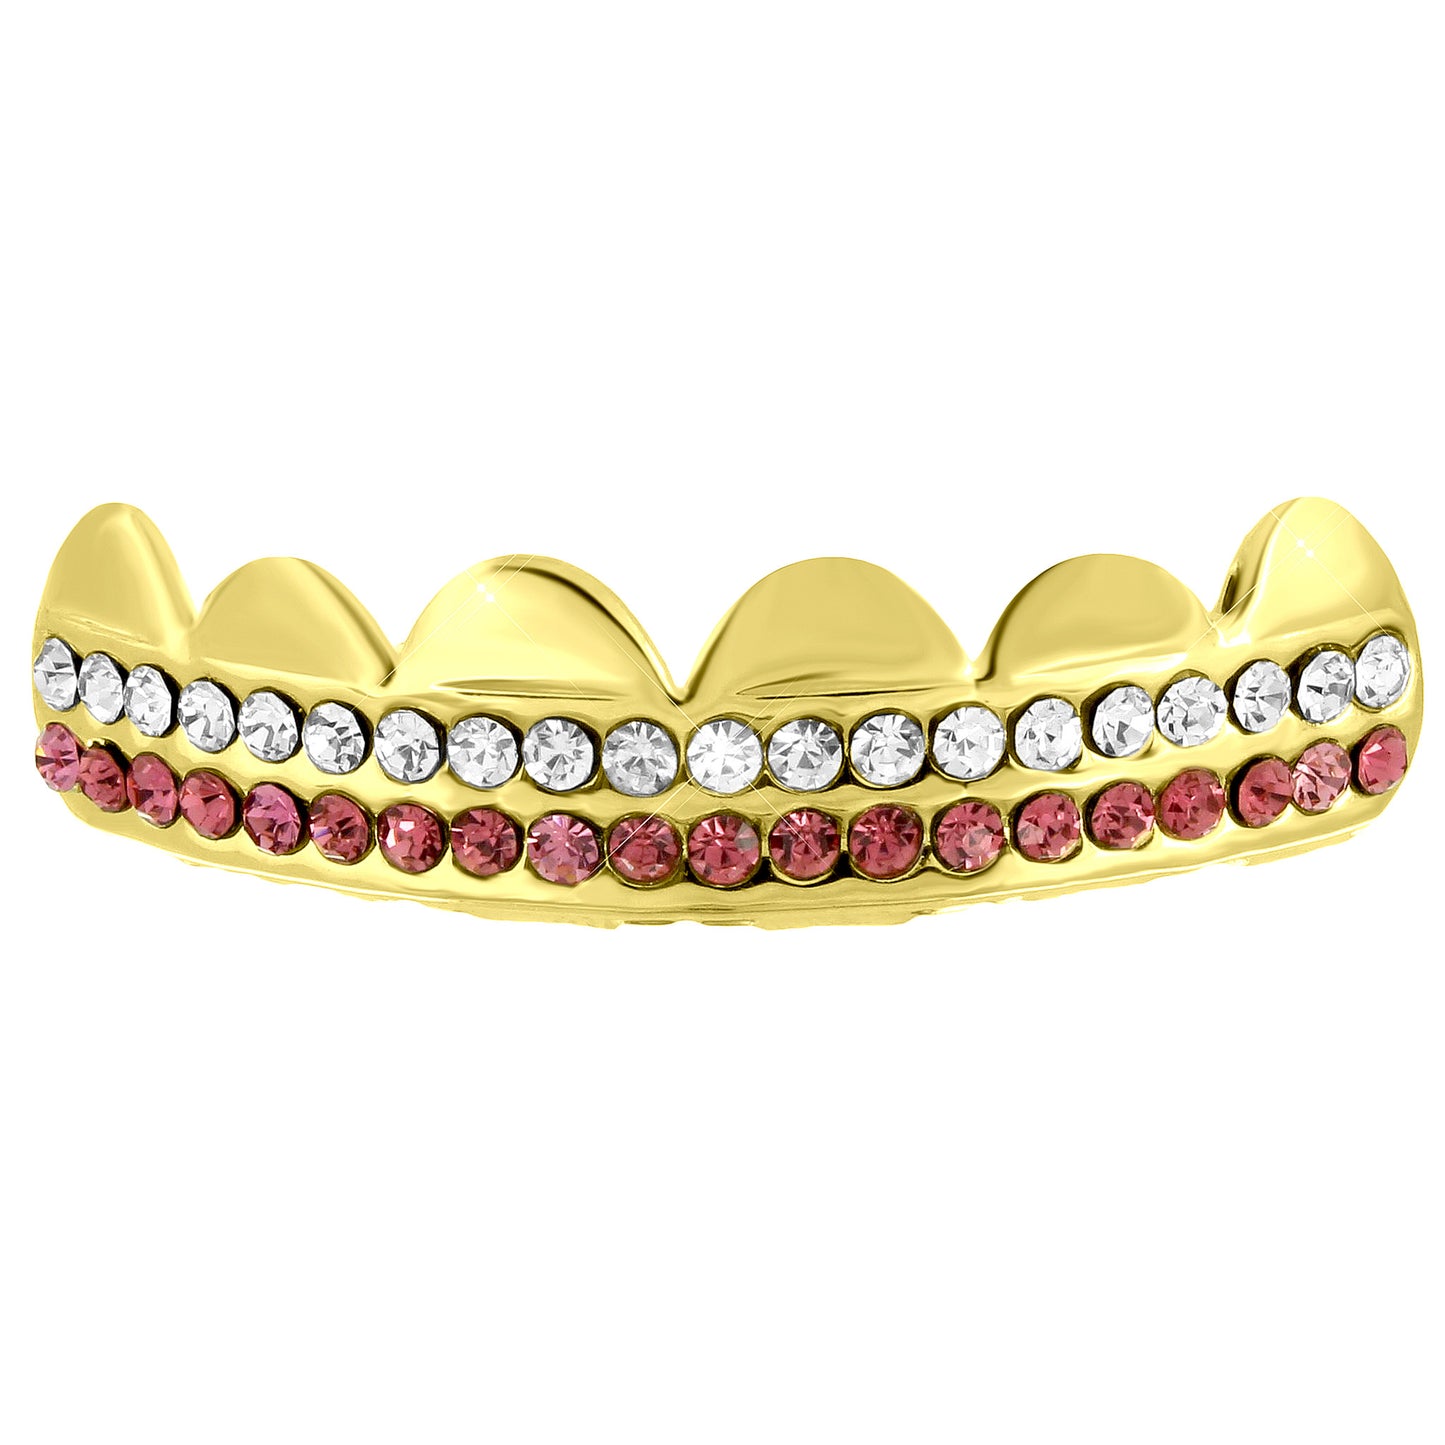 14k Yellow Gold Finish  Top Grillz